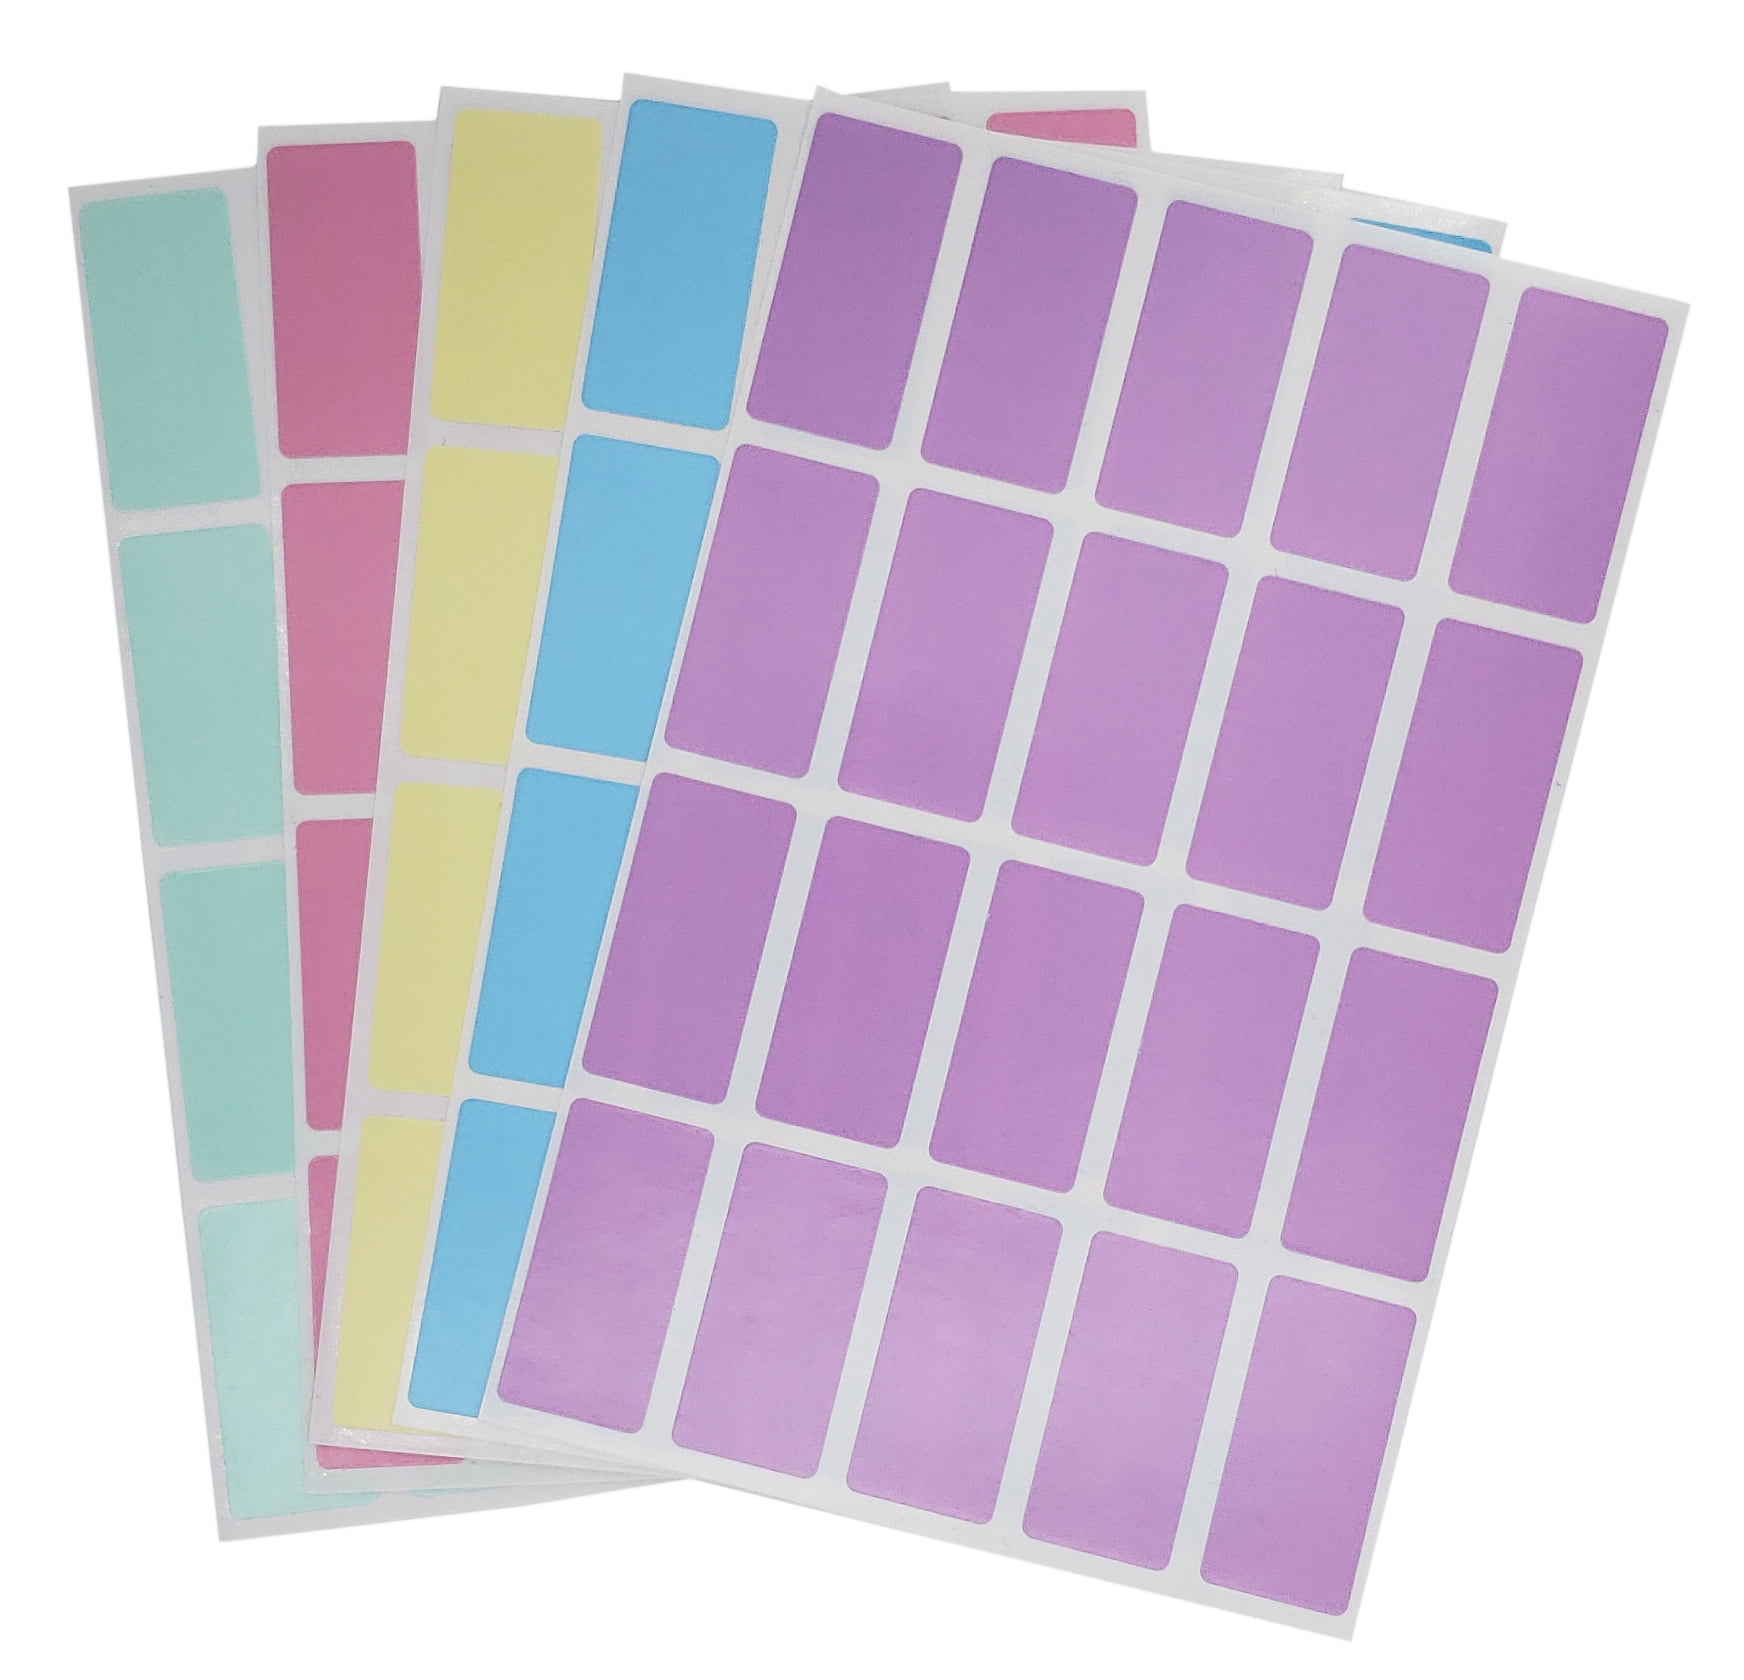 Rectangular Stickers 1.57 x 0.75 Inch for Inventory File Folders Labels 480 Pack 